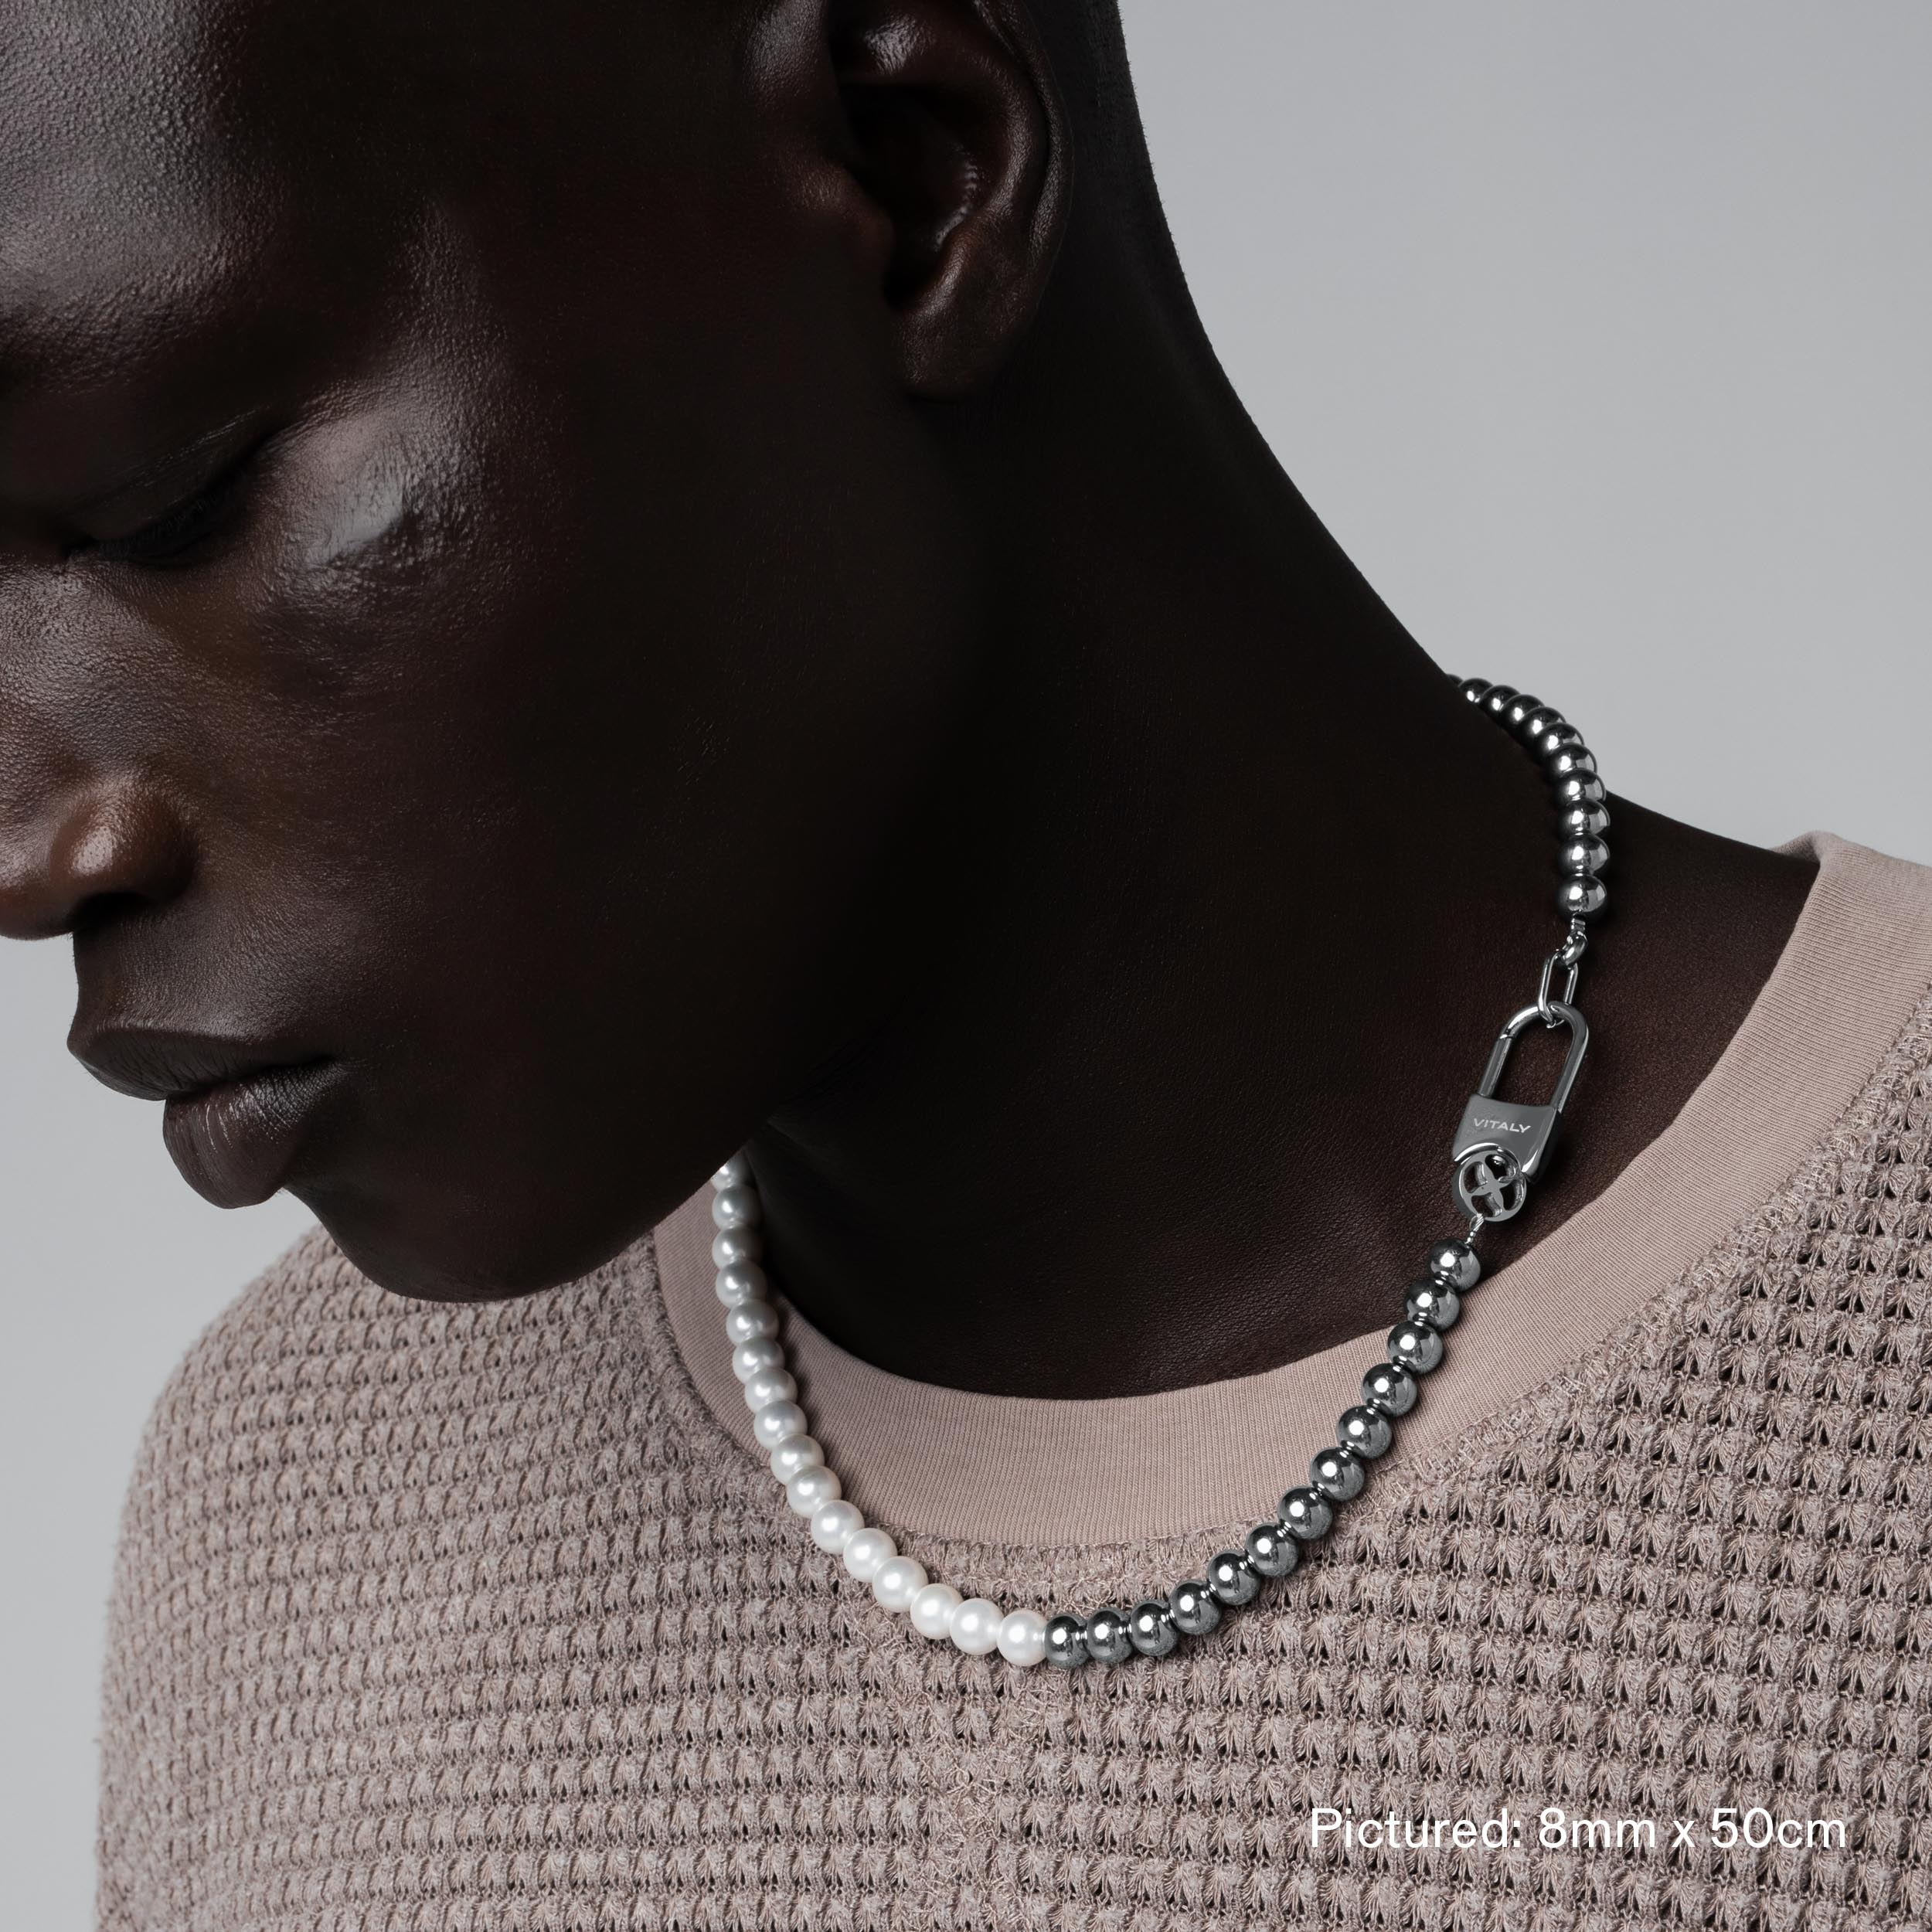 Vitaly Akoya Chain | 100% Recycled Stainless Steel Accessories